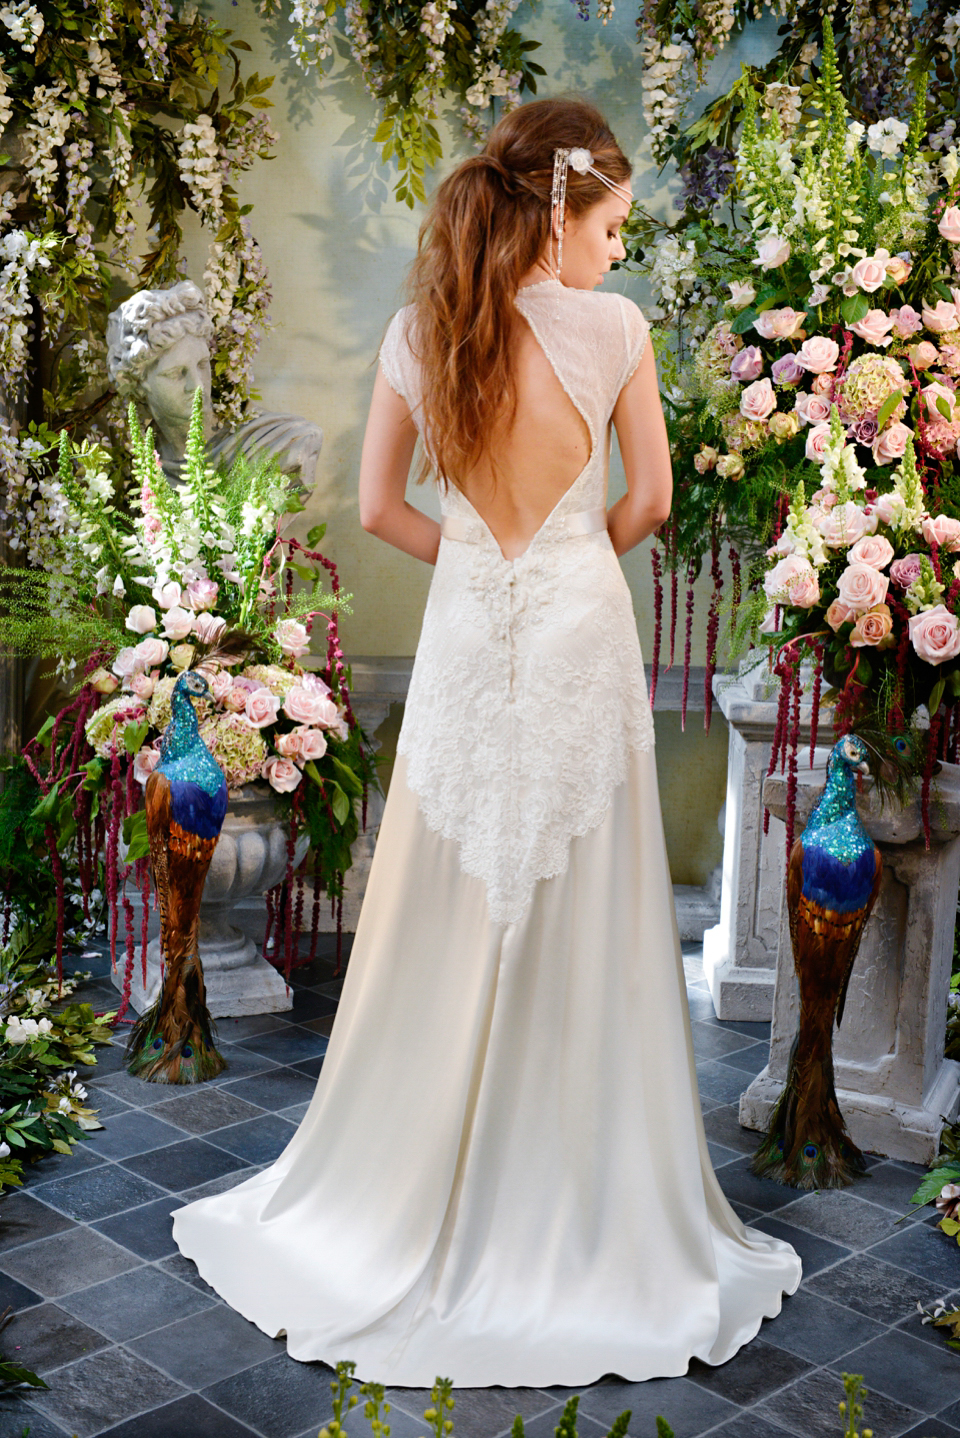 Seapearl Wedding Dress from Terry Fox's Siren Song Collection